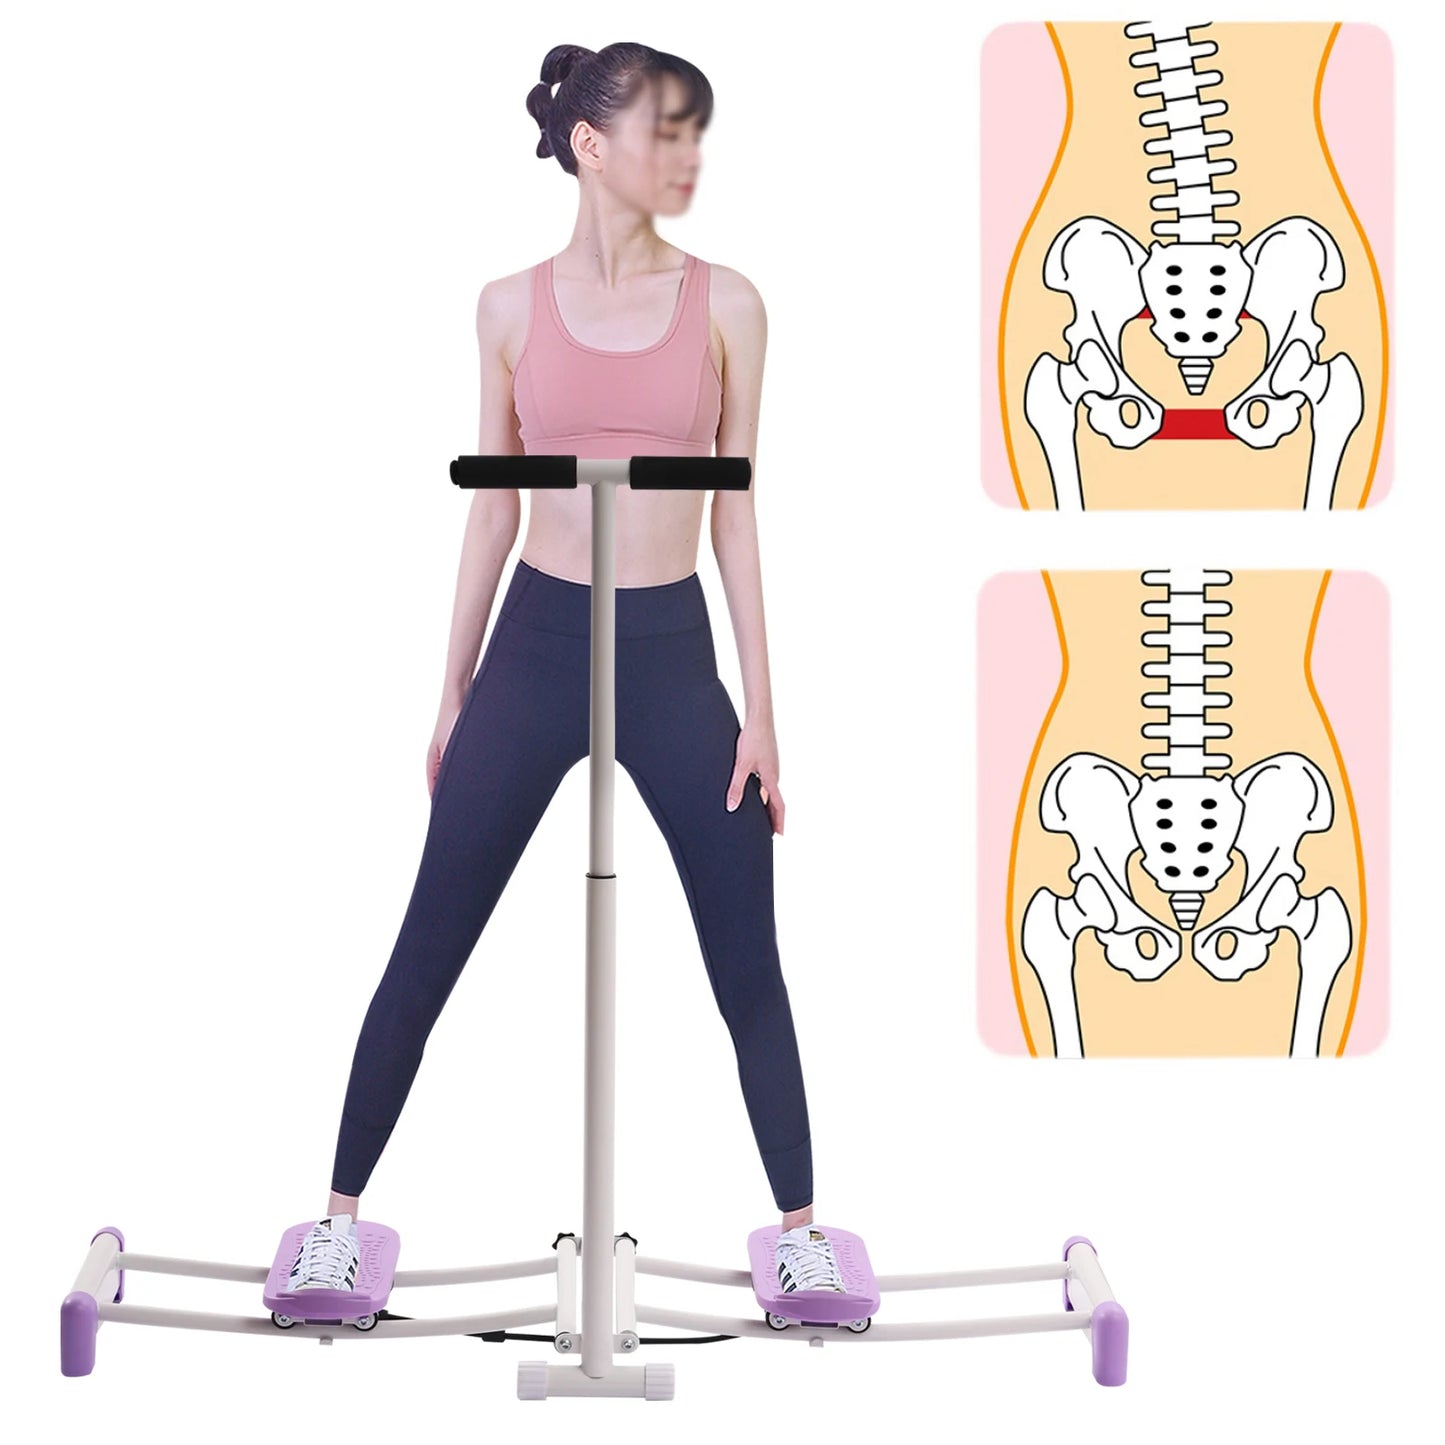 Pelvic Floor Muscle Fitness Equipment/Yoga Strengthen Thigh Training Device Home